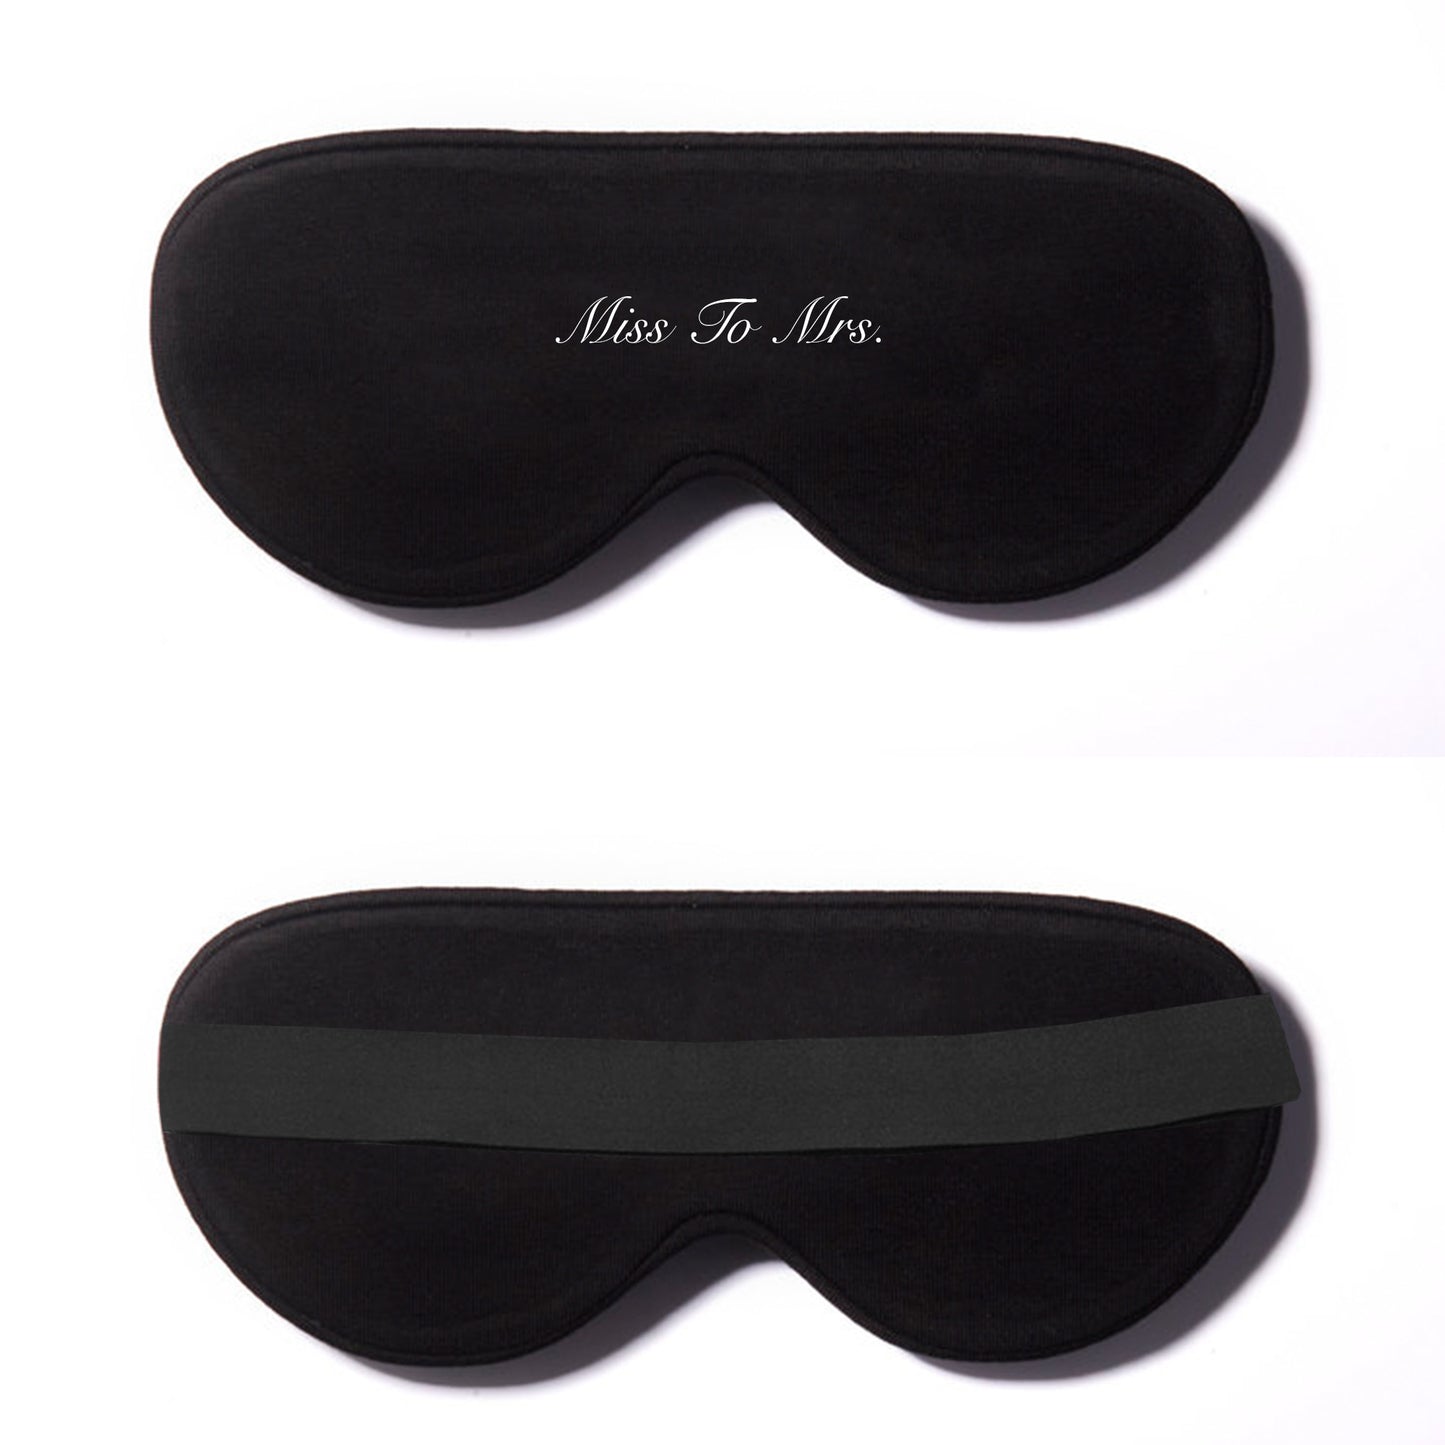 Miss To Mrs. Cotton Lux Sleep Mask